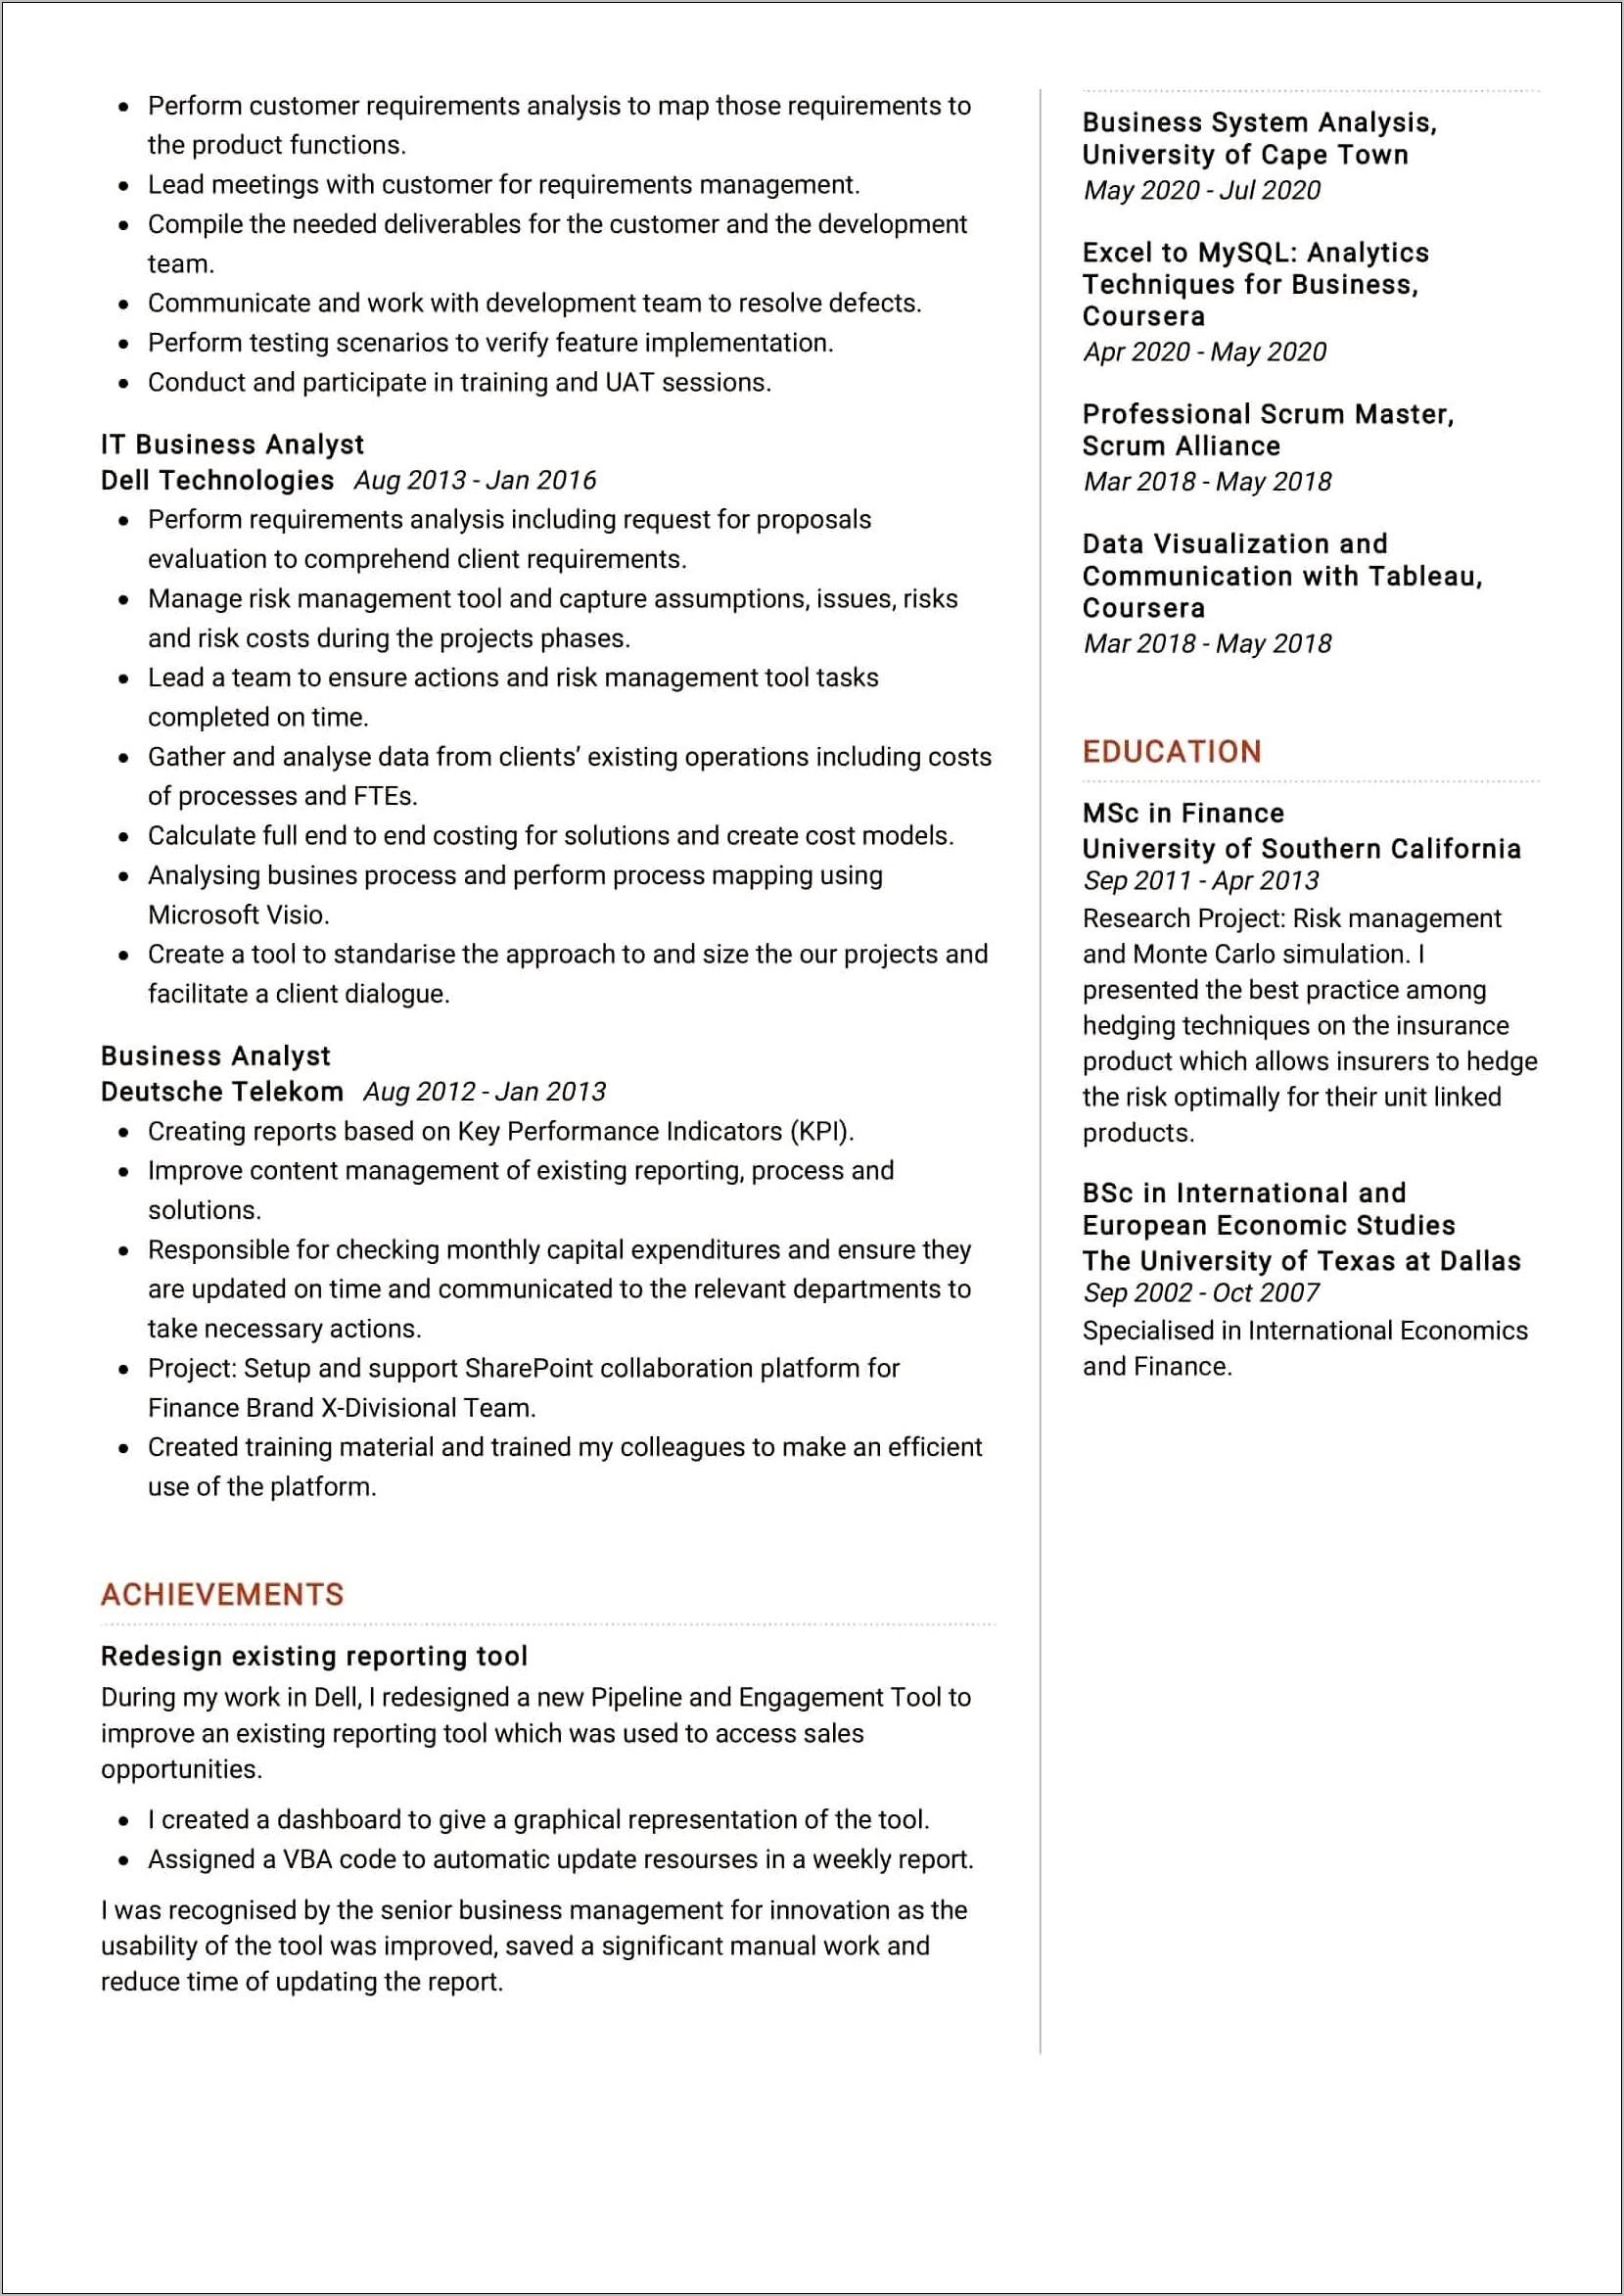 Atm Card Systems Business Analyst Sample Resume